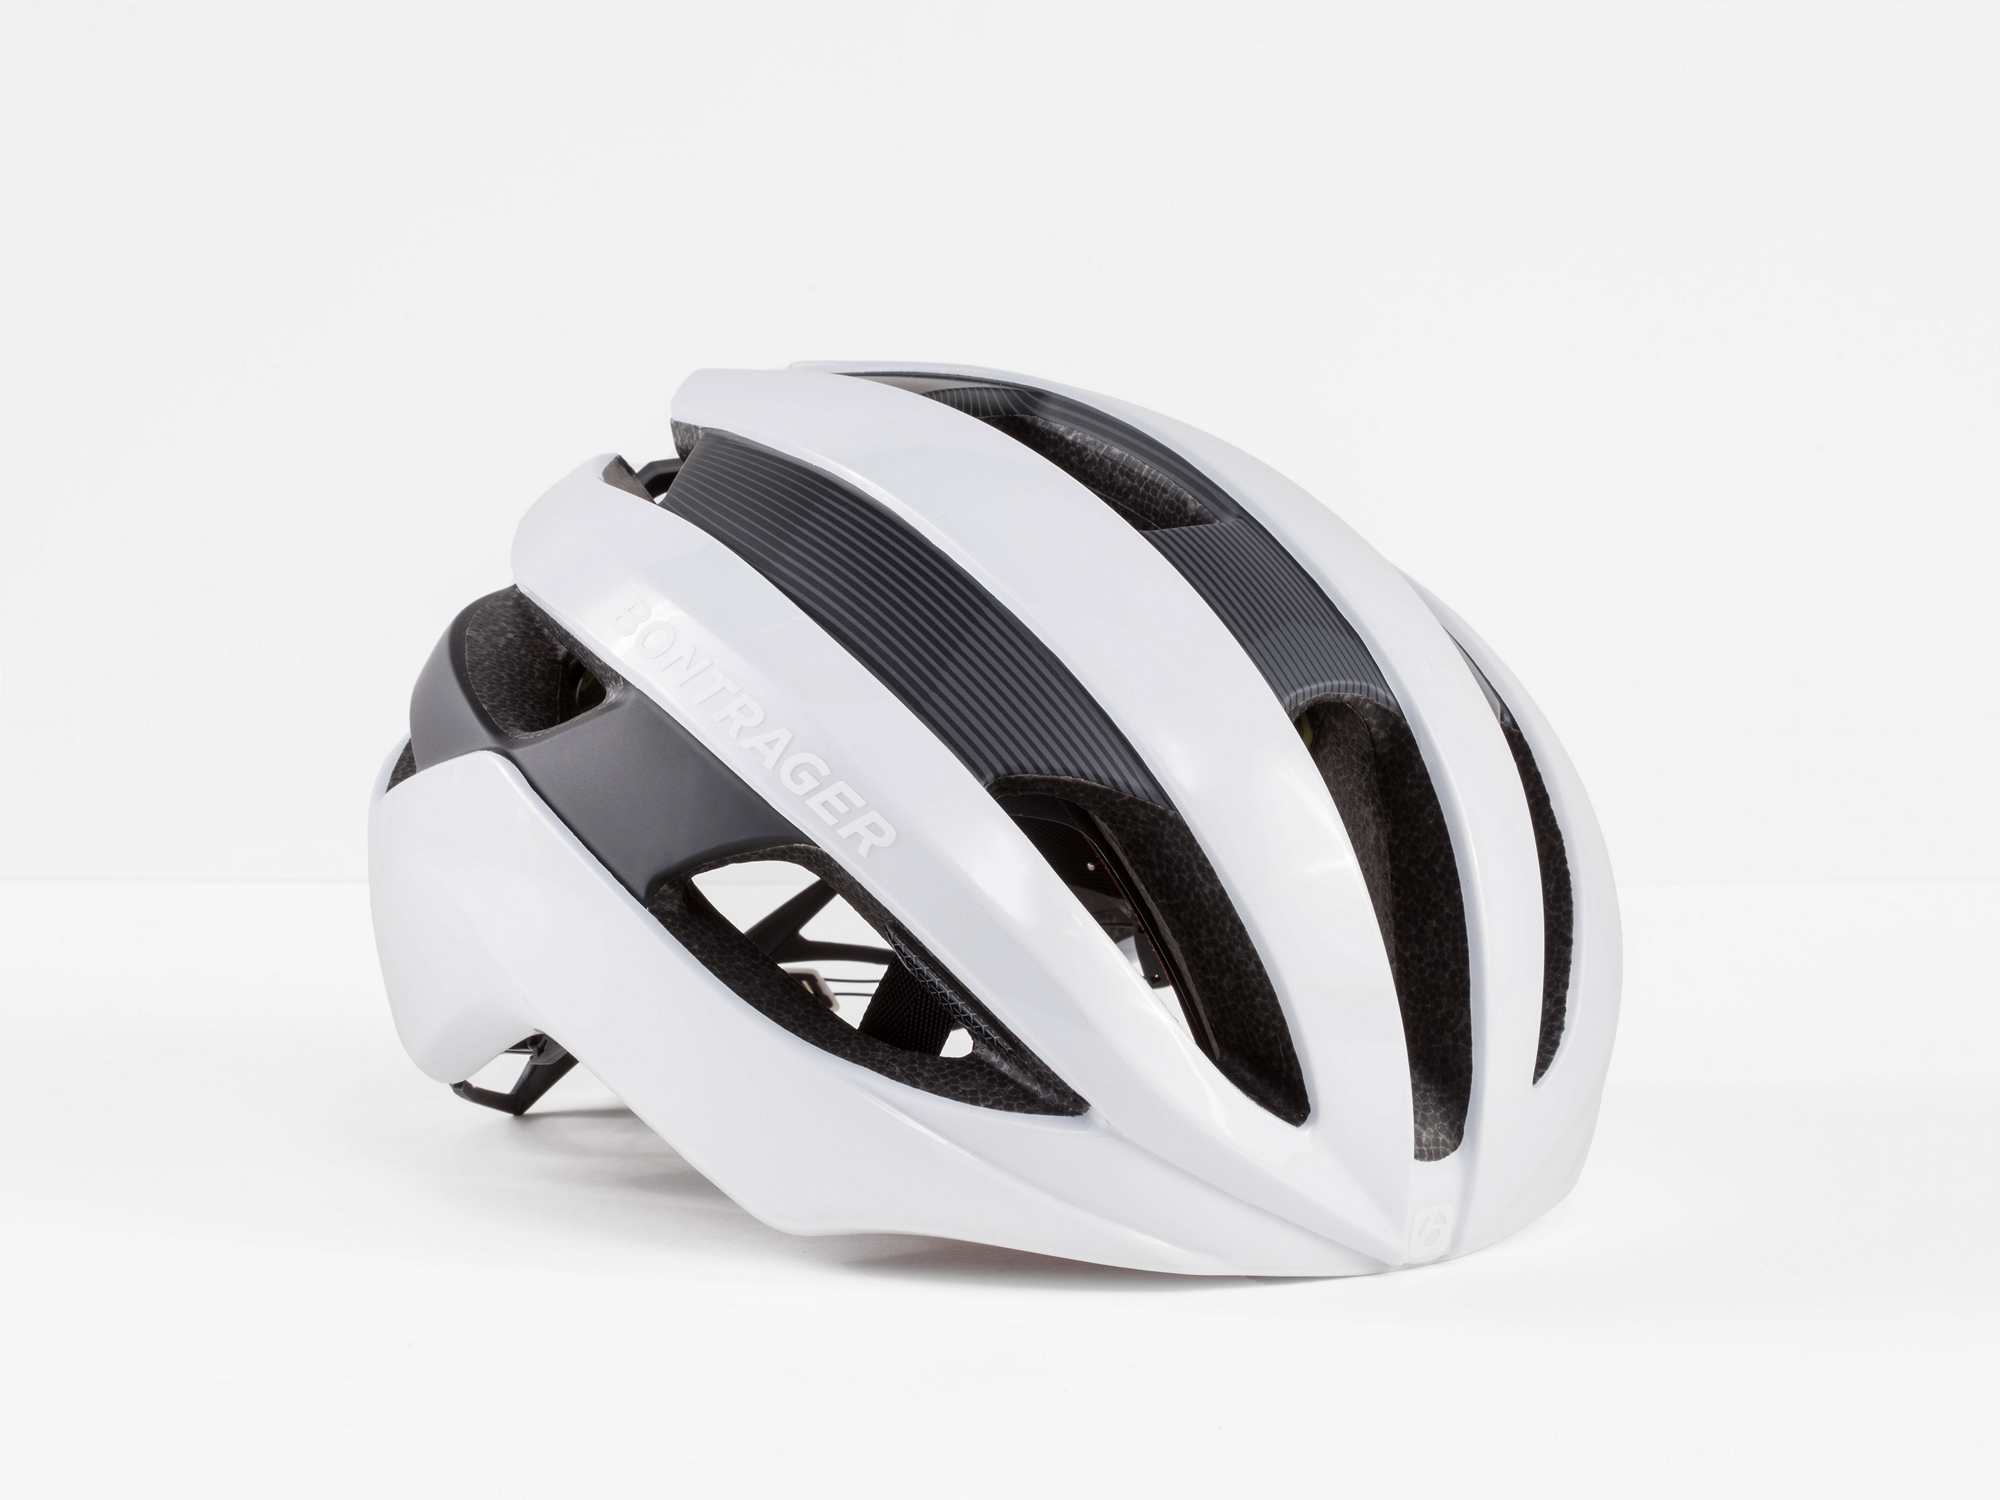 <a href="https://cycles-clement.be/product/casque-bont-velocis-mips-large-white/">CASQUE  BONT VELOCIS MIPS LARGE WHITE</a>